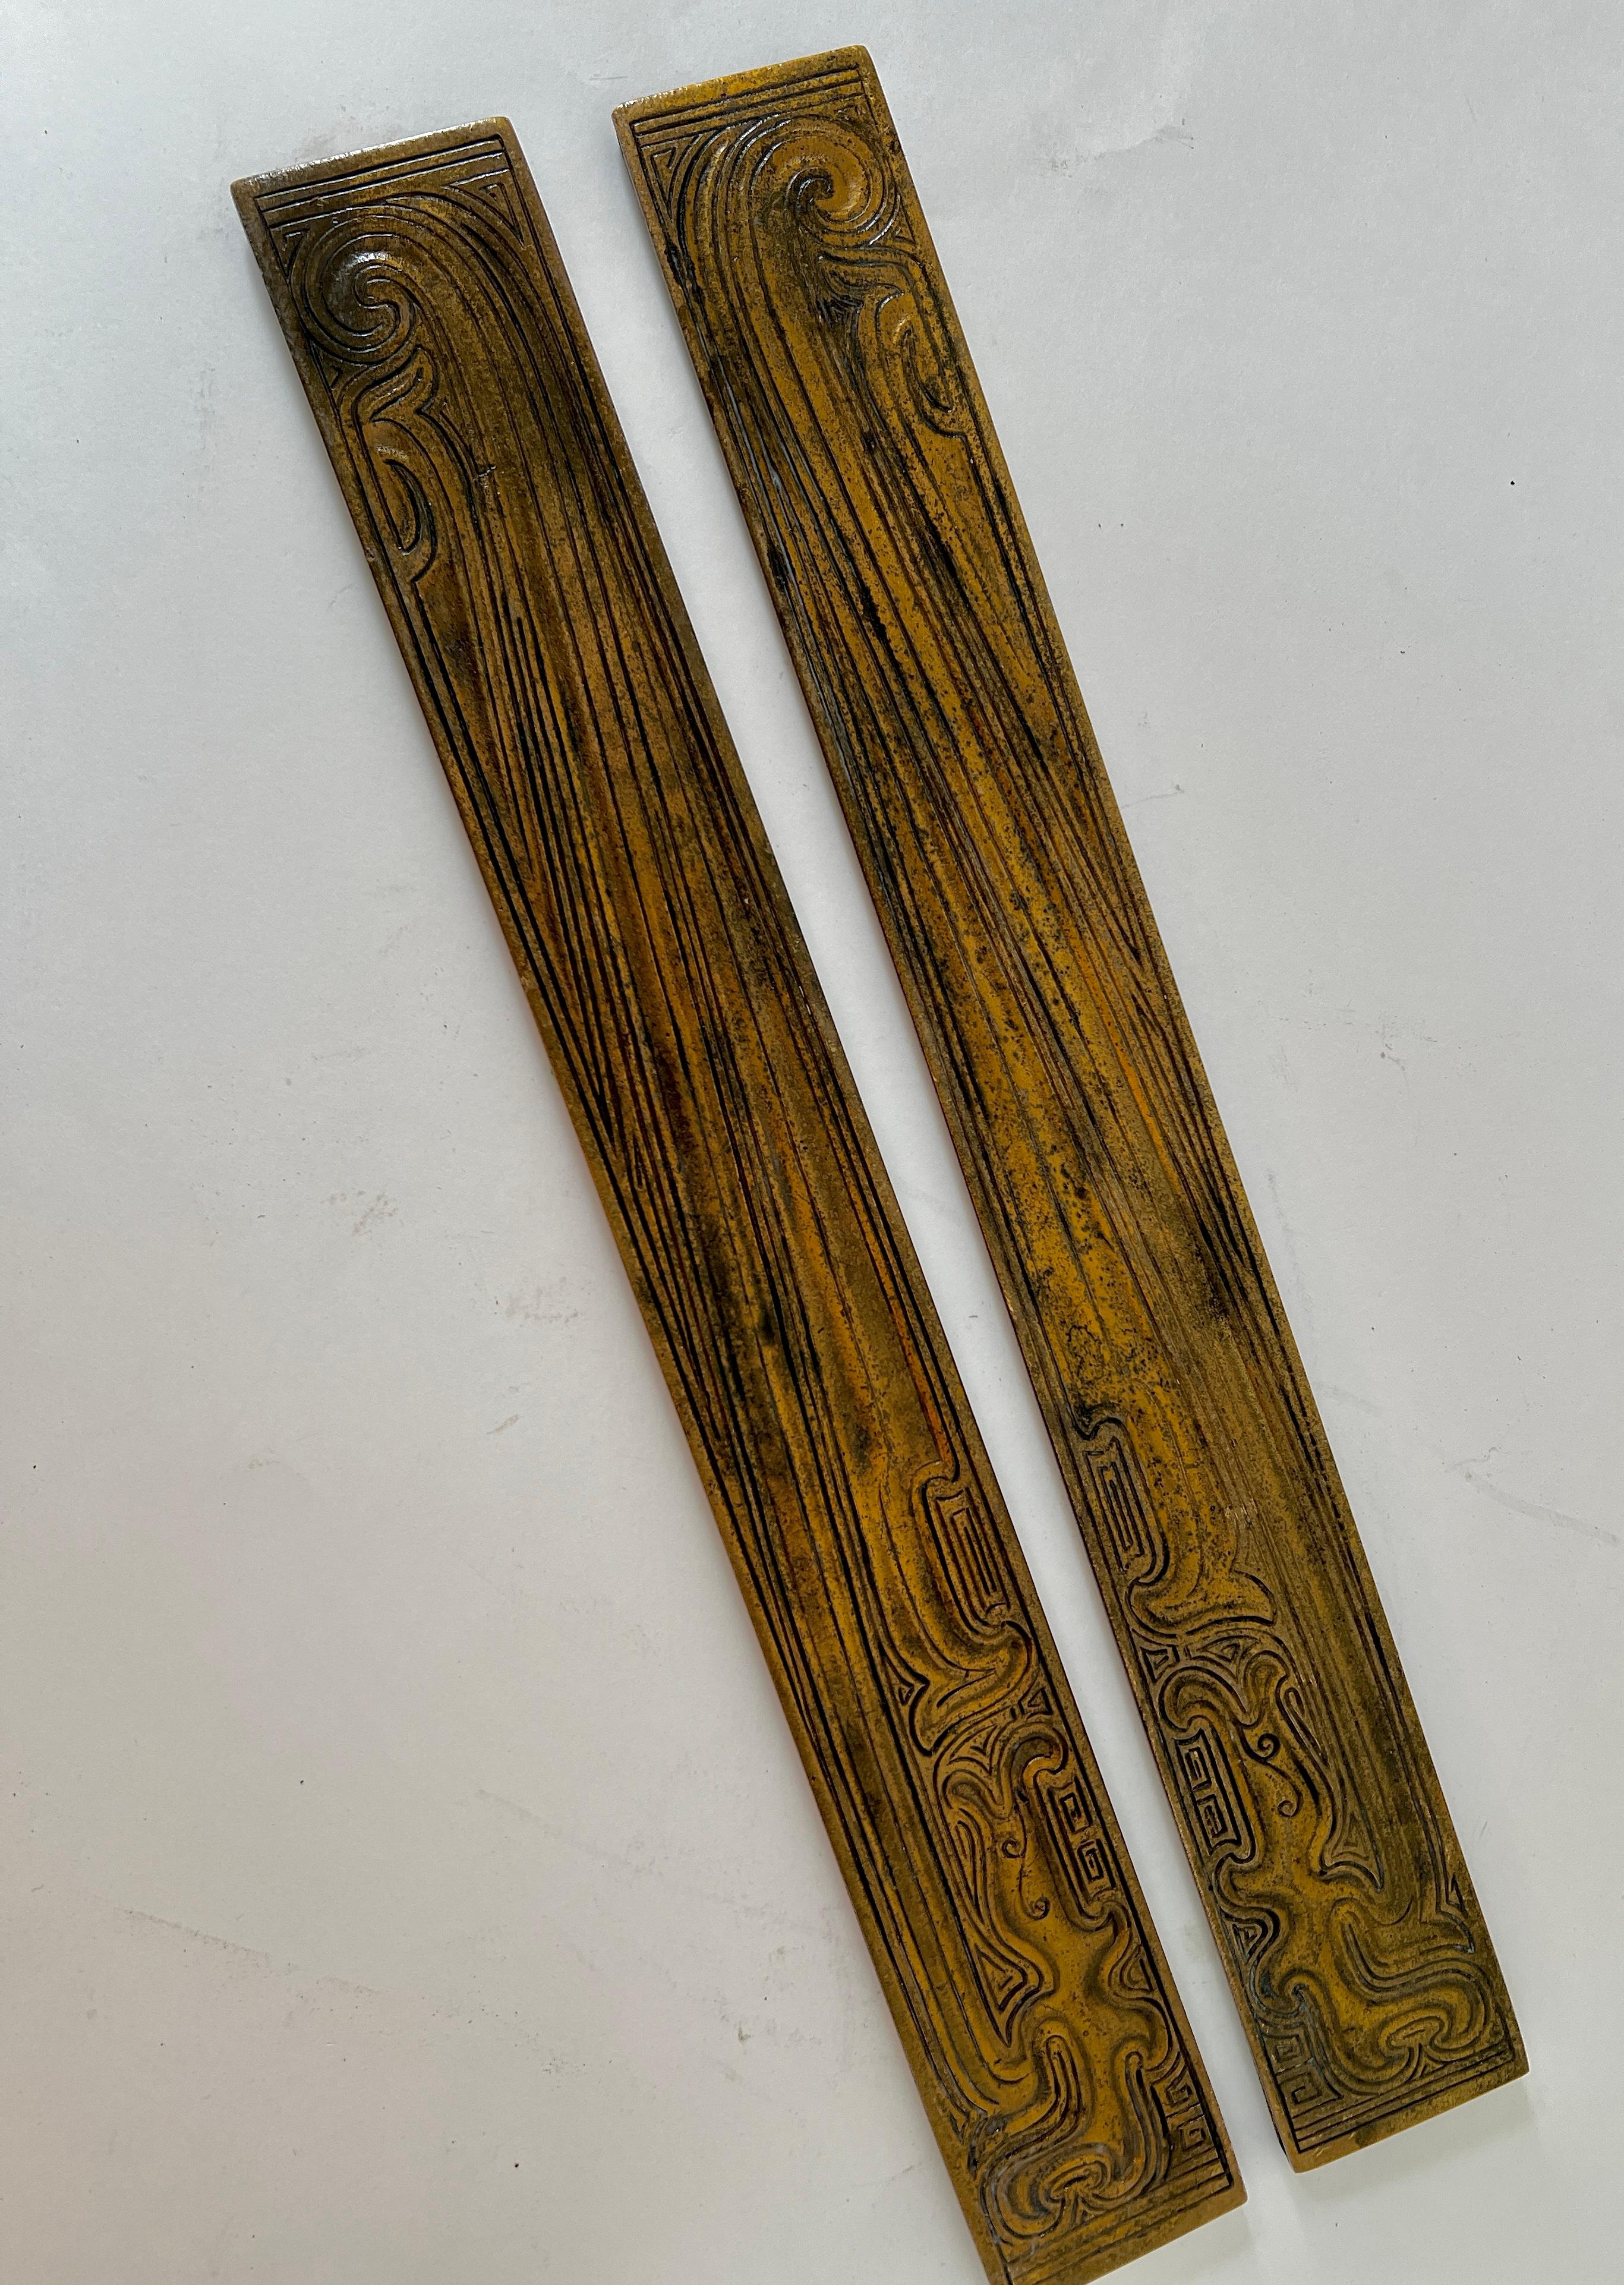 Pair of Dore or Gilt Bronze Blotter ends by Tiffany Studios New York.  The pair are item number 1751 and are a beautiful and rare Chinese pattern.  

Ready for any desk slits on the sides allow for easy set up with blotter.  The Chinese pattern is